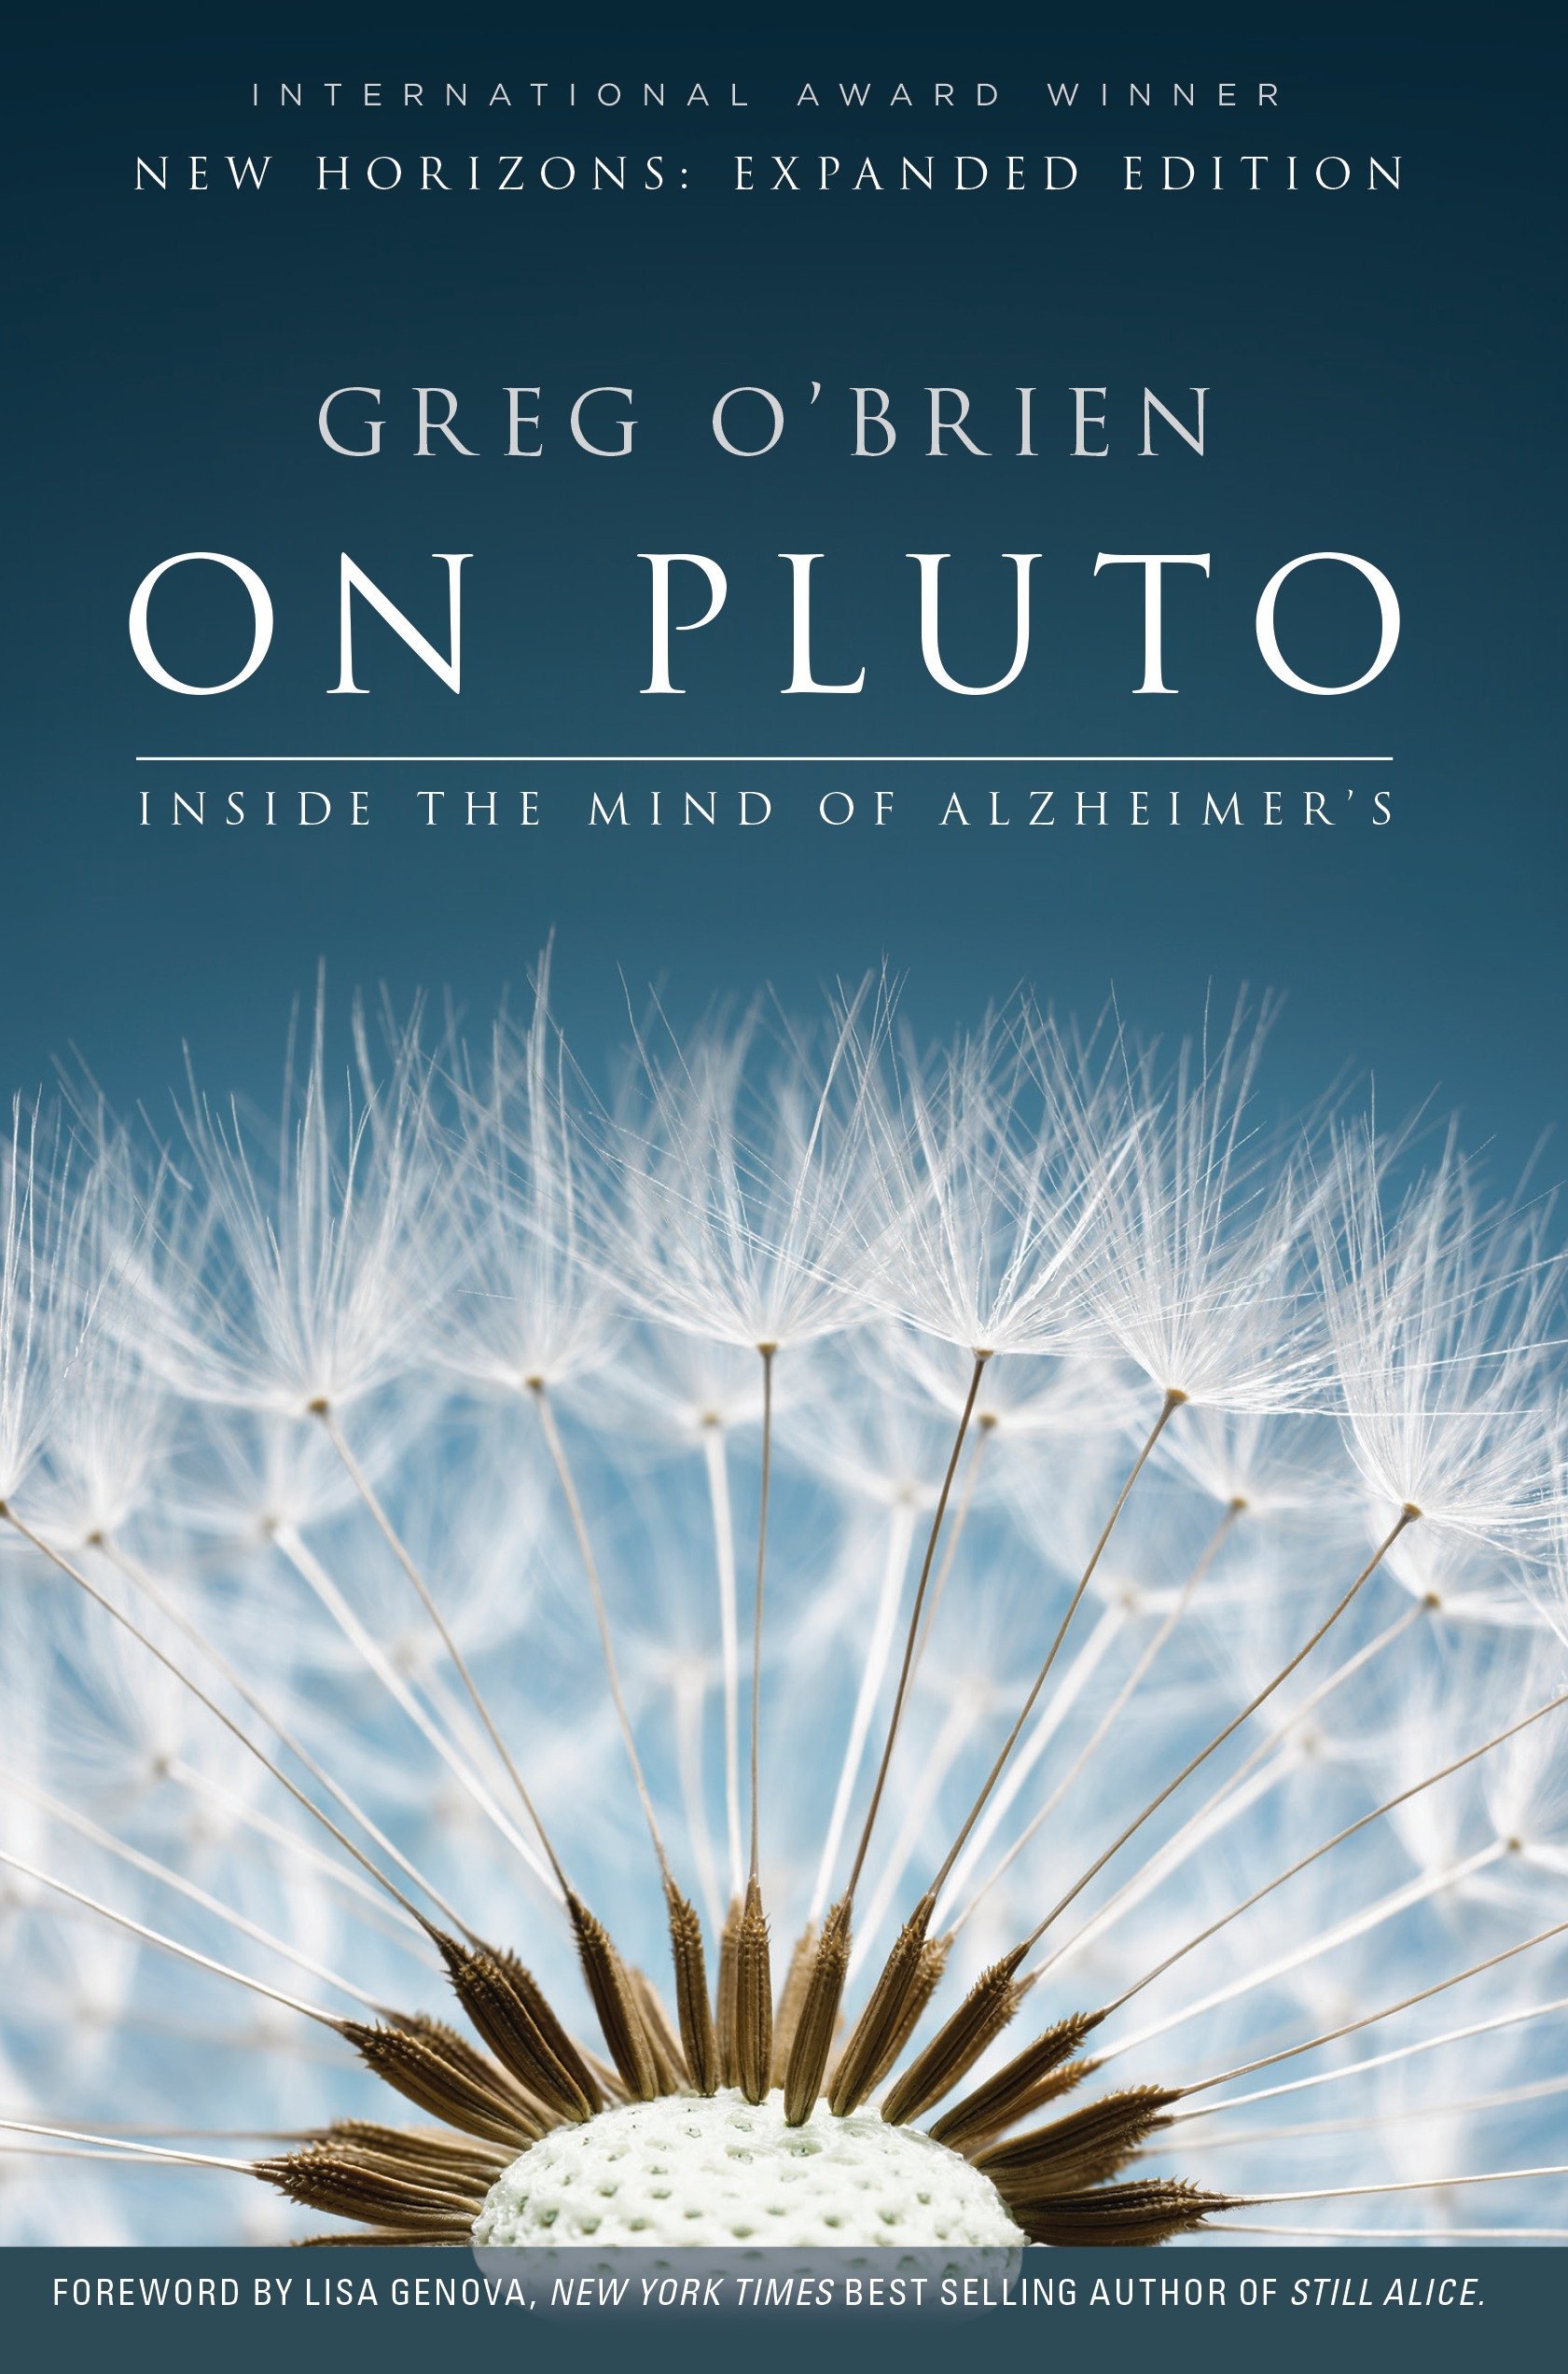 On Pluto has gained international attention